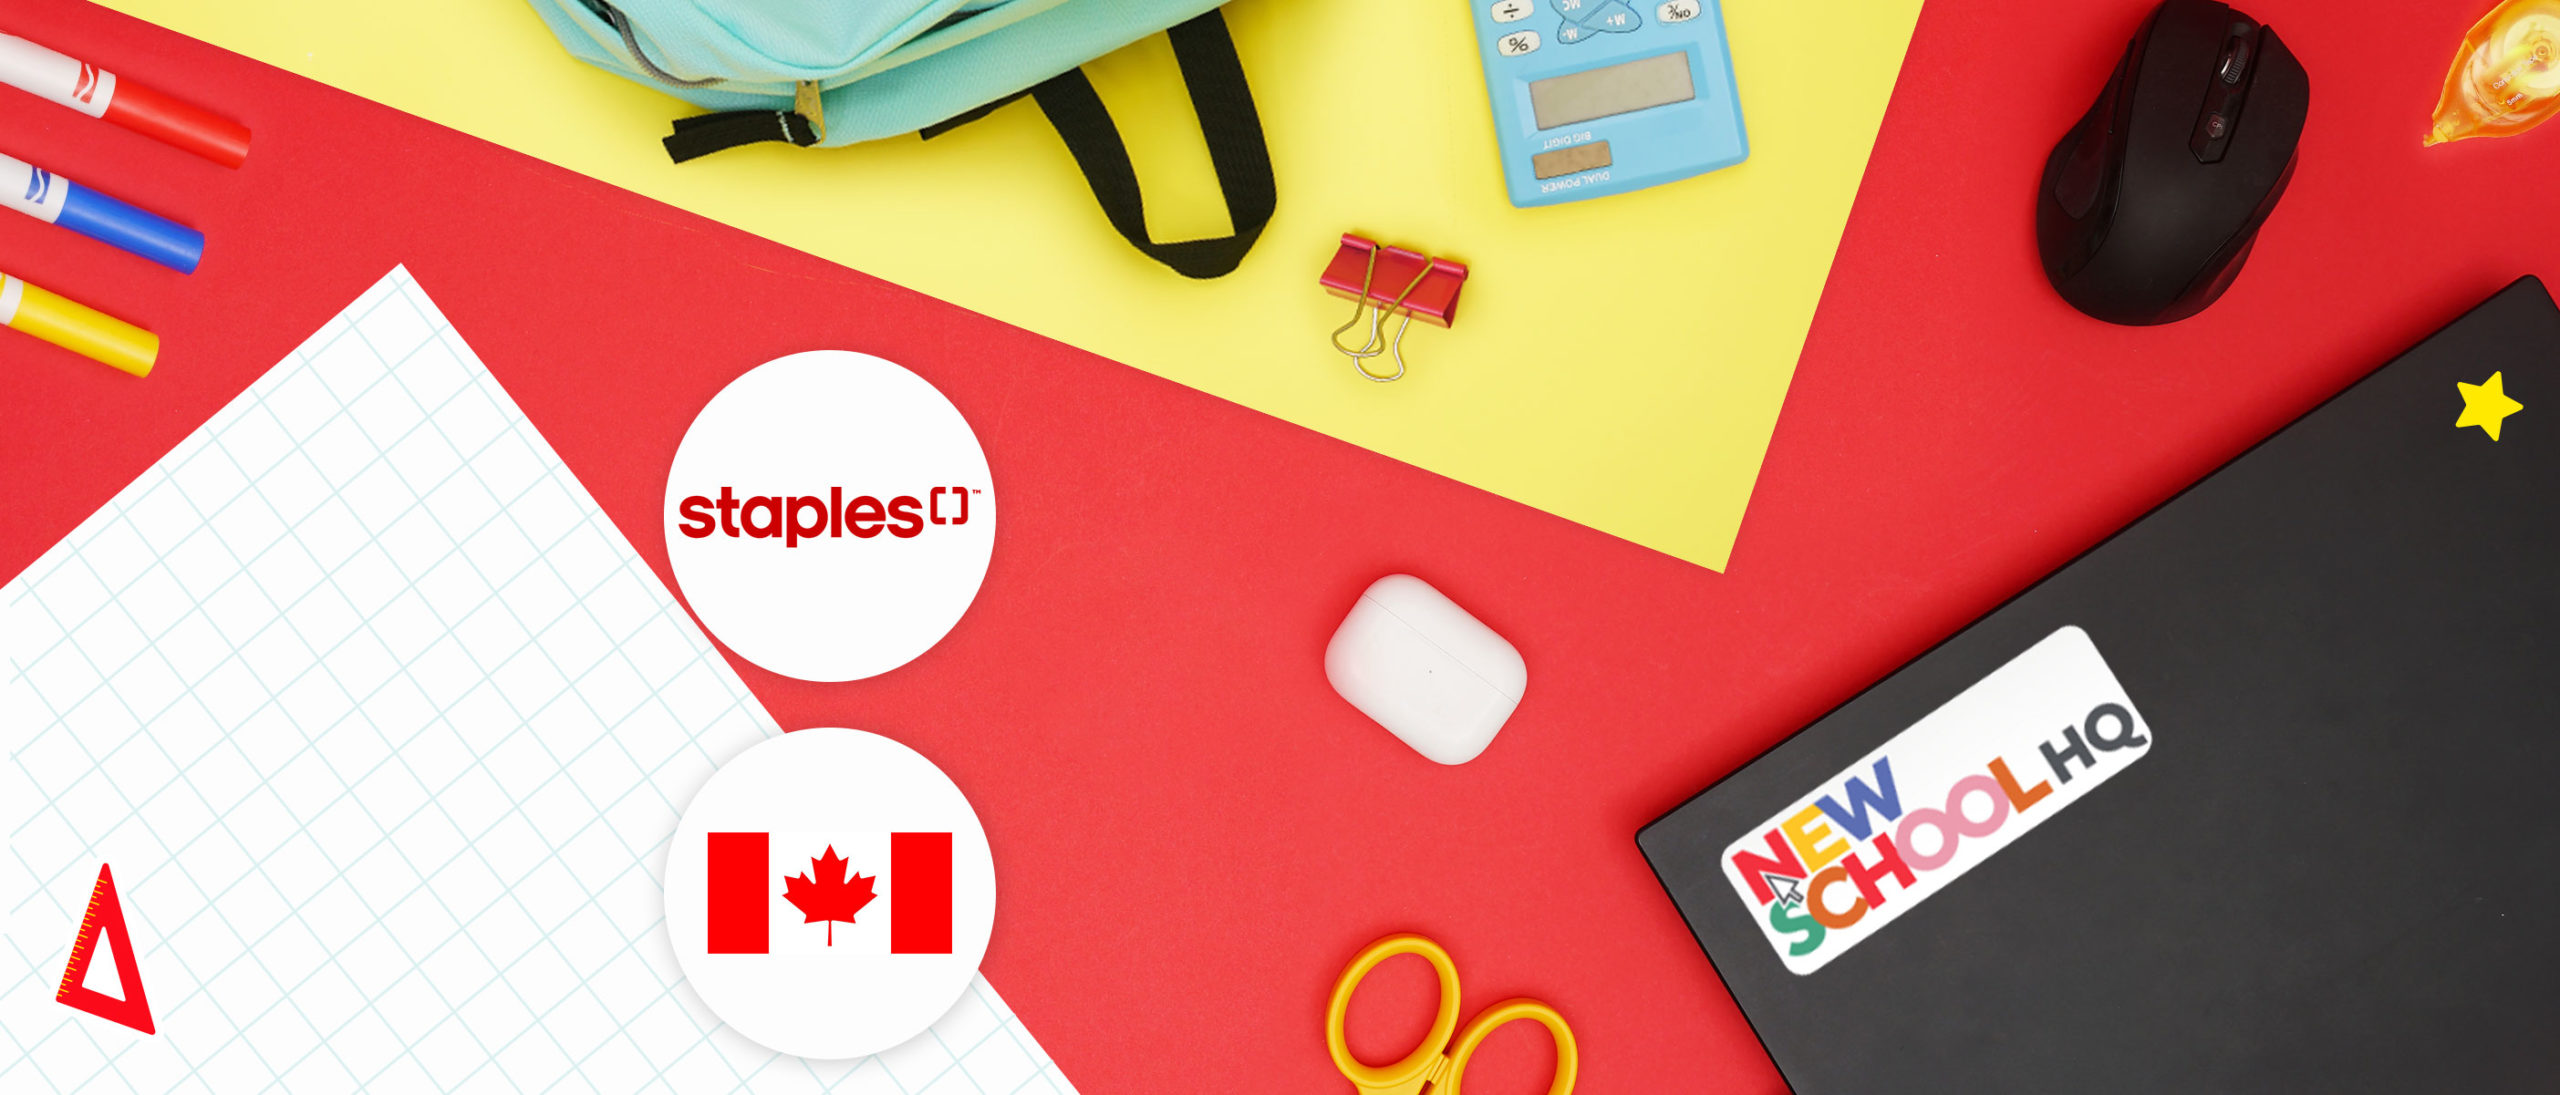 Welcome to the New School HQ! Top 10 Back-to-School Picks From Staples